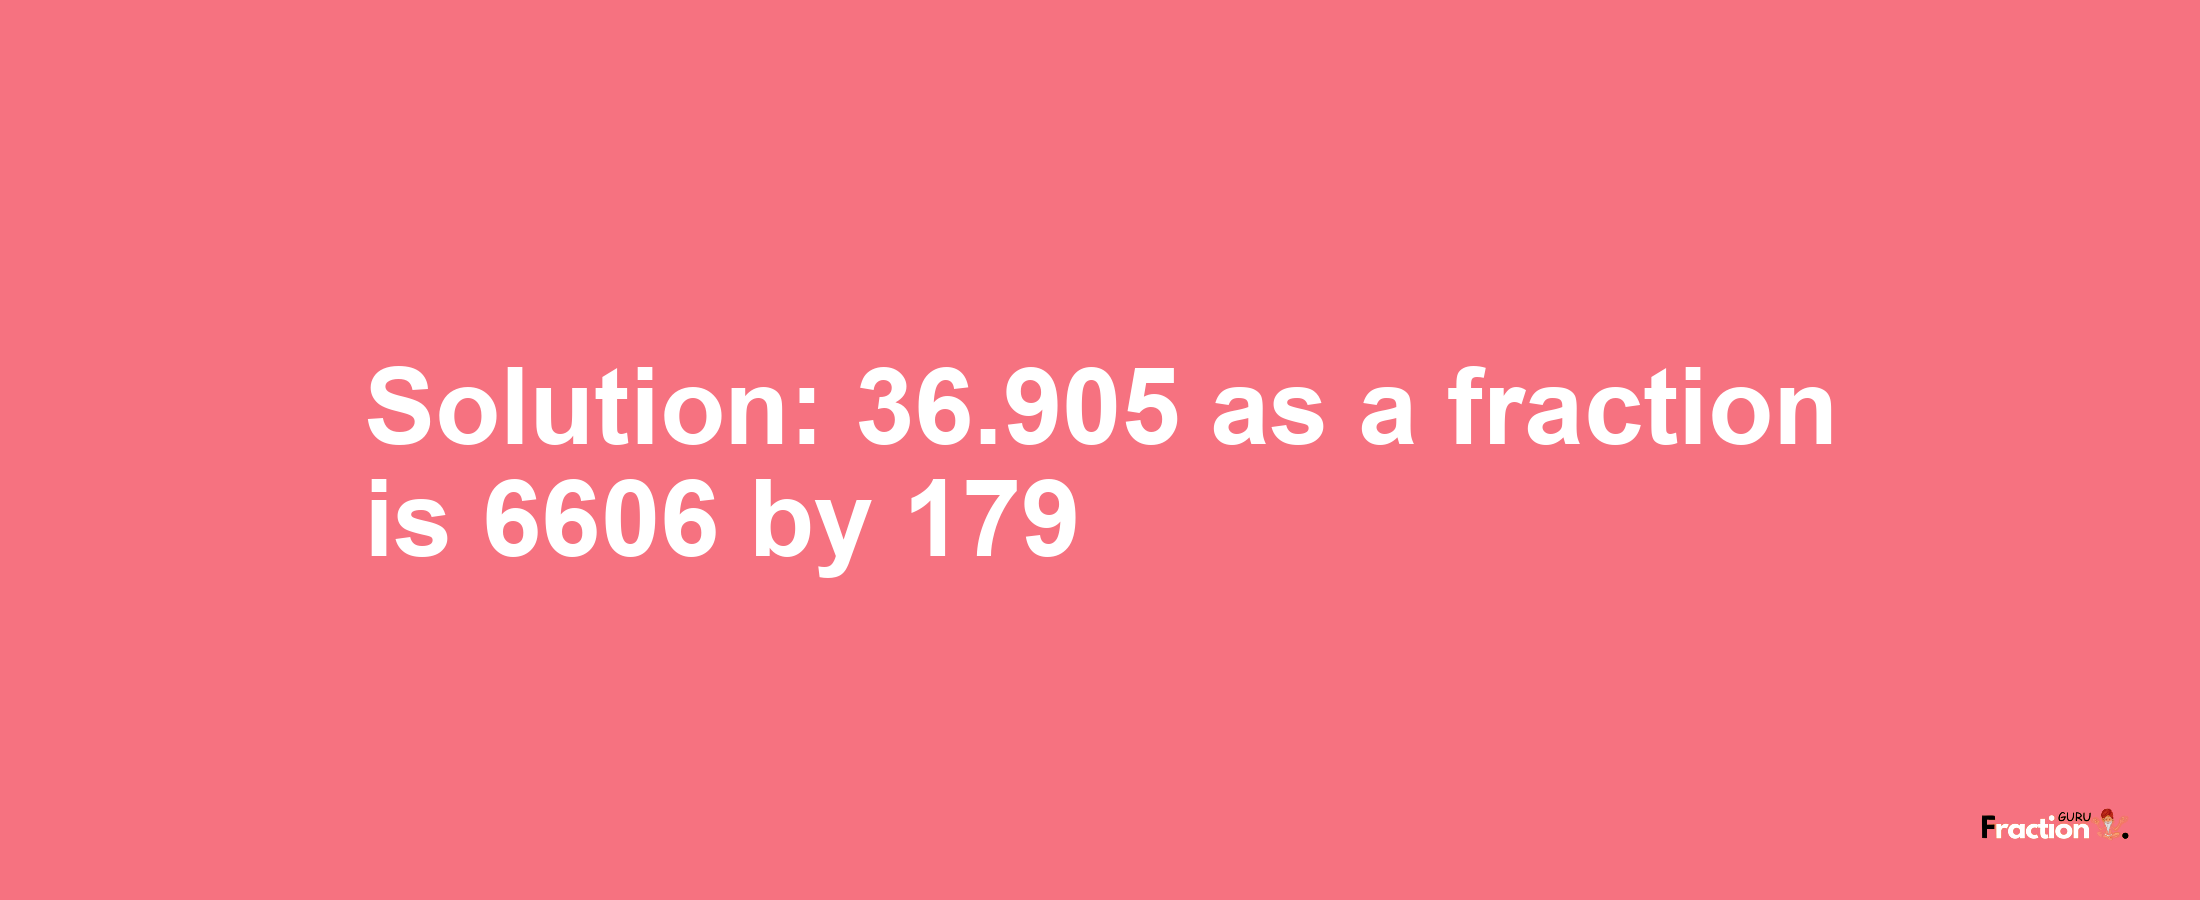 Solution:36.905 as a fraction is 6606/179